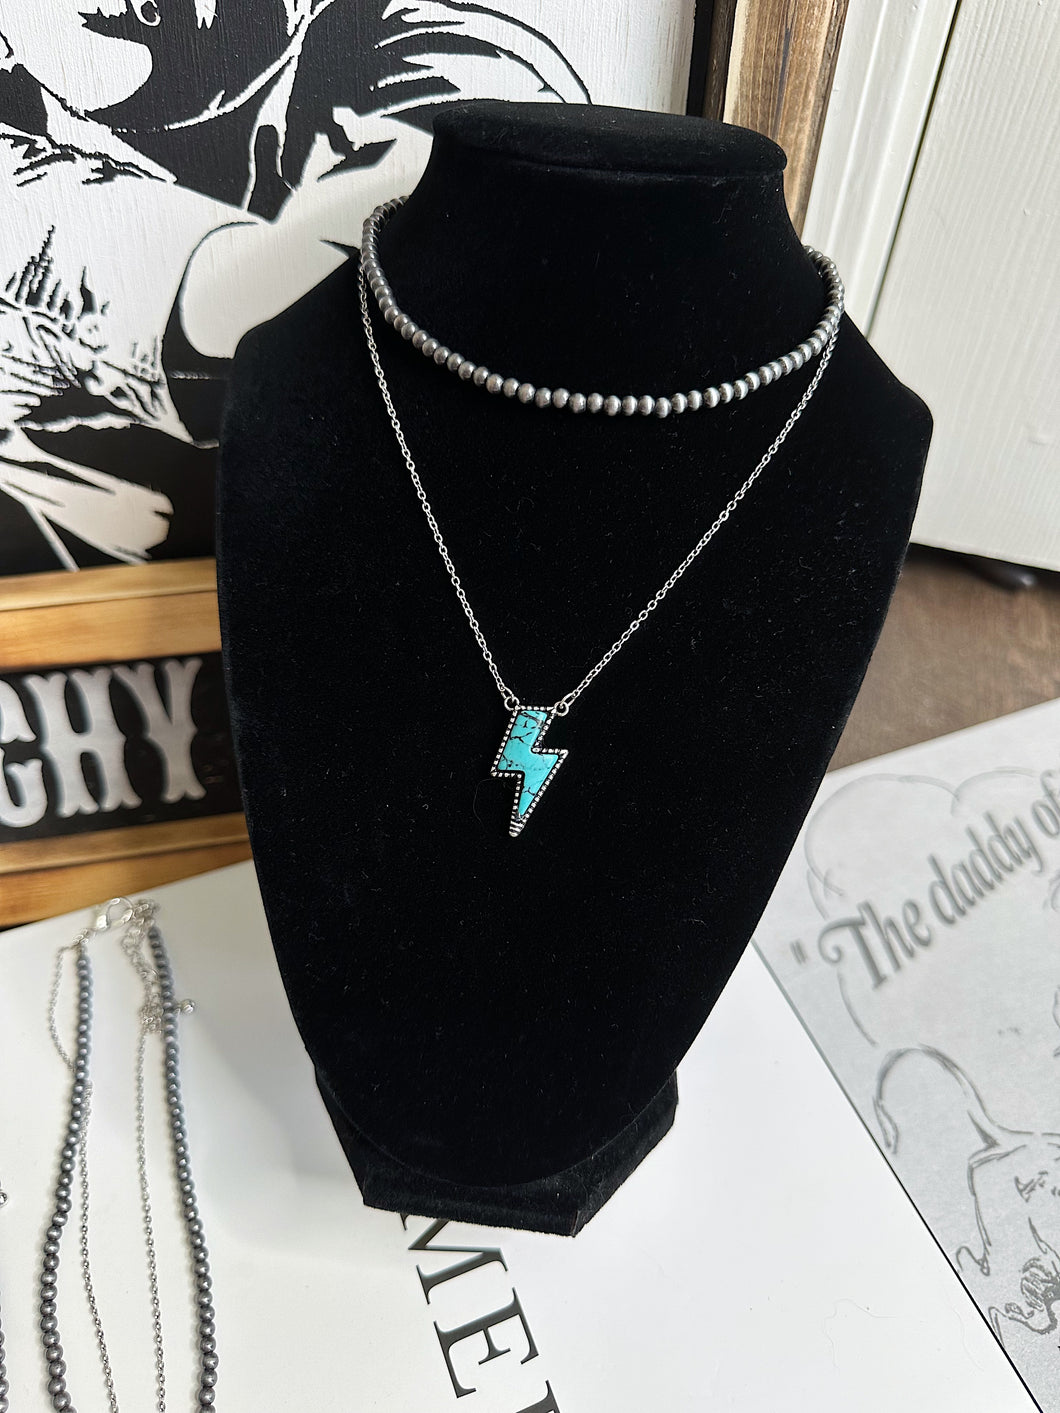 The Navajo Bolt Necklace